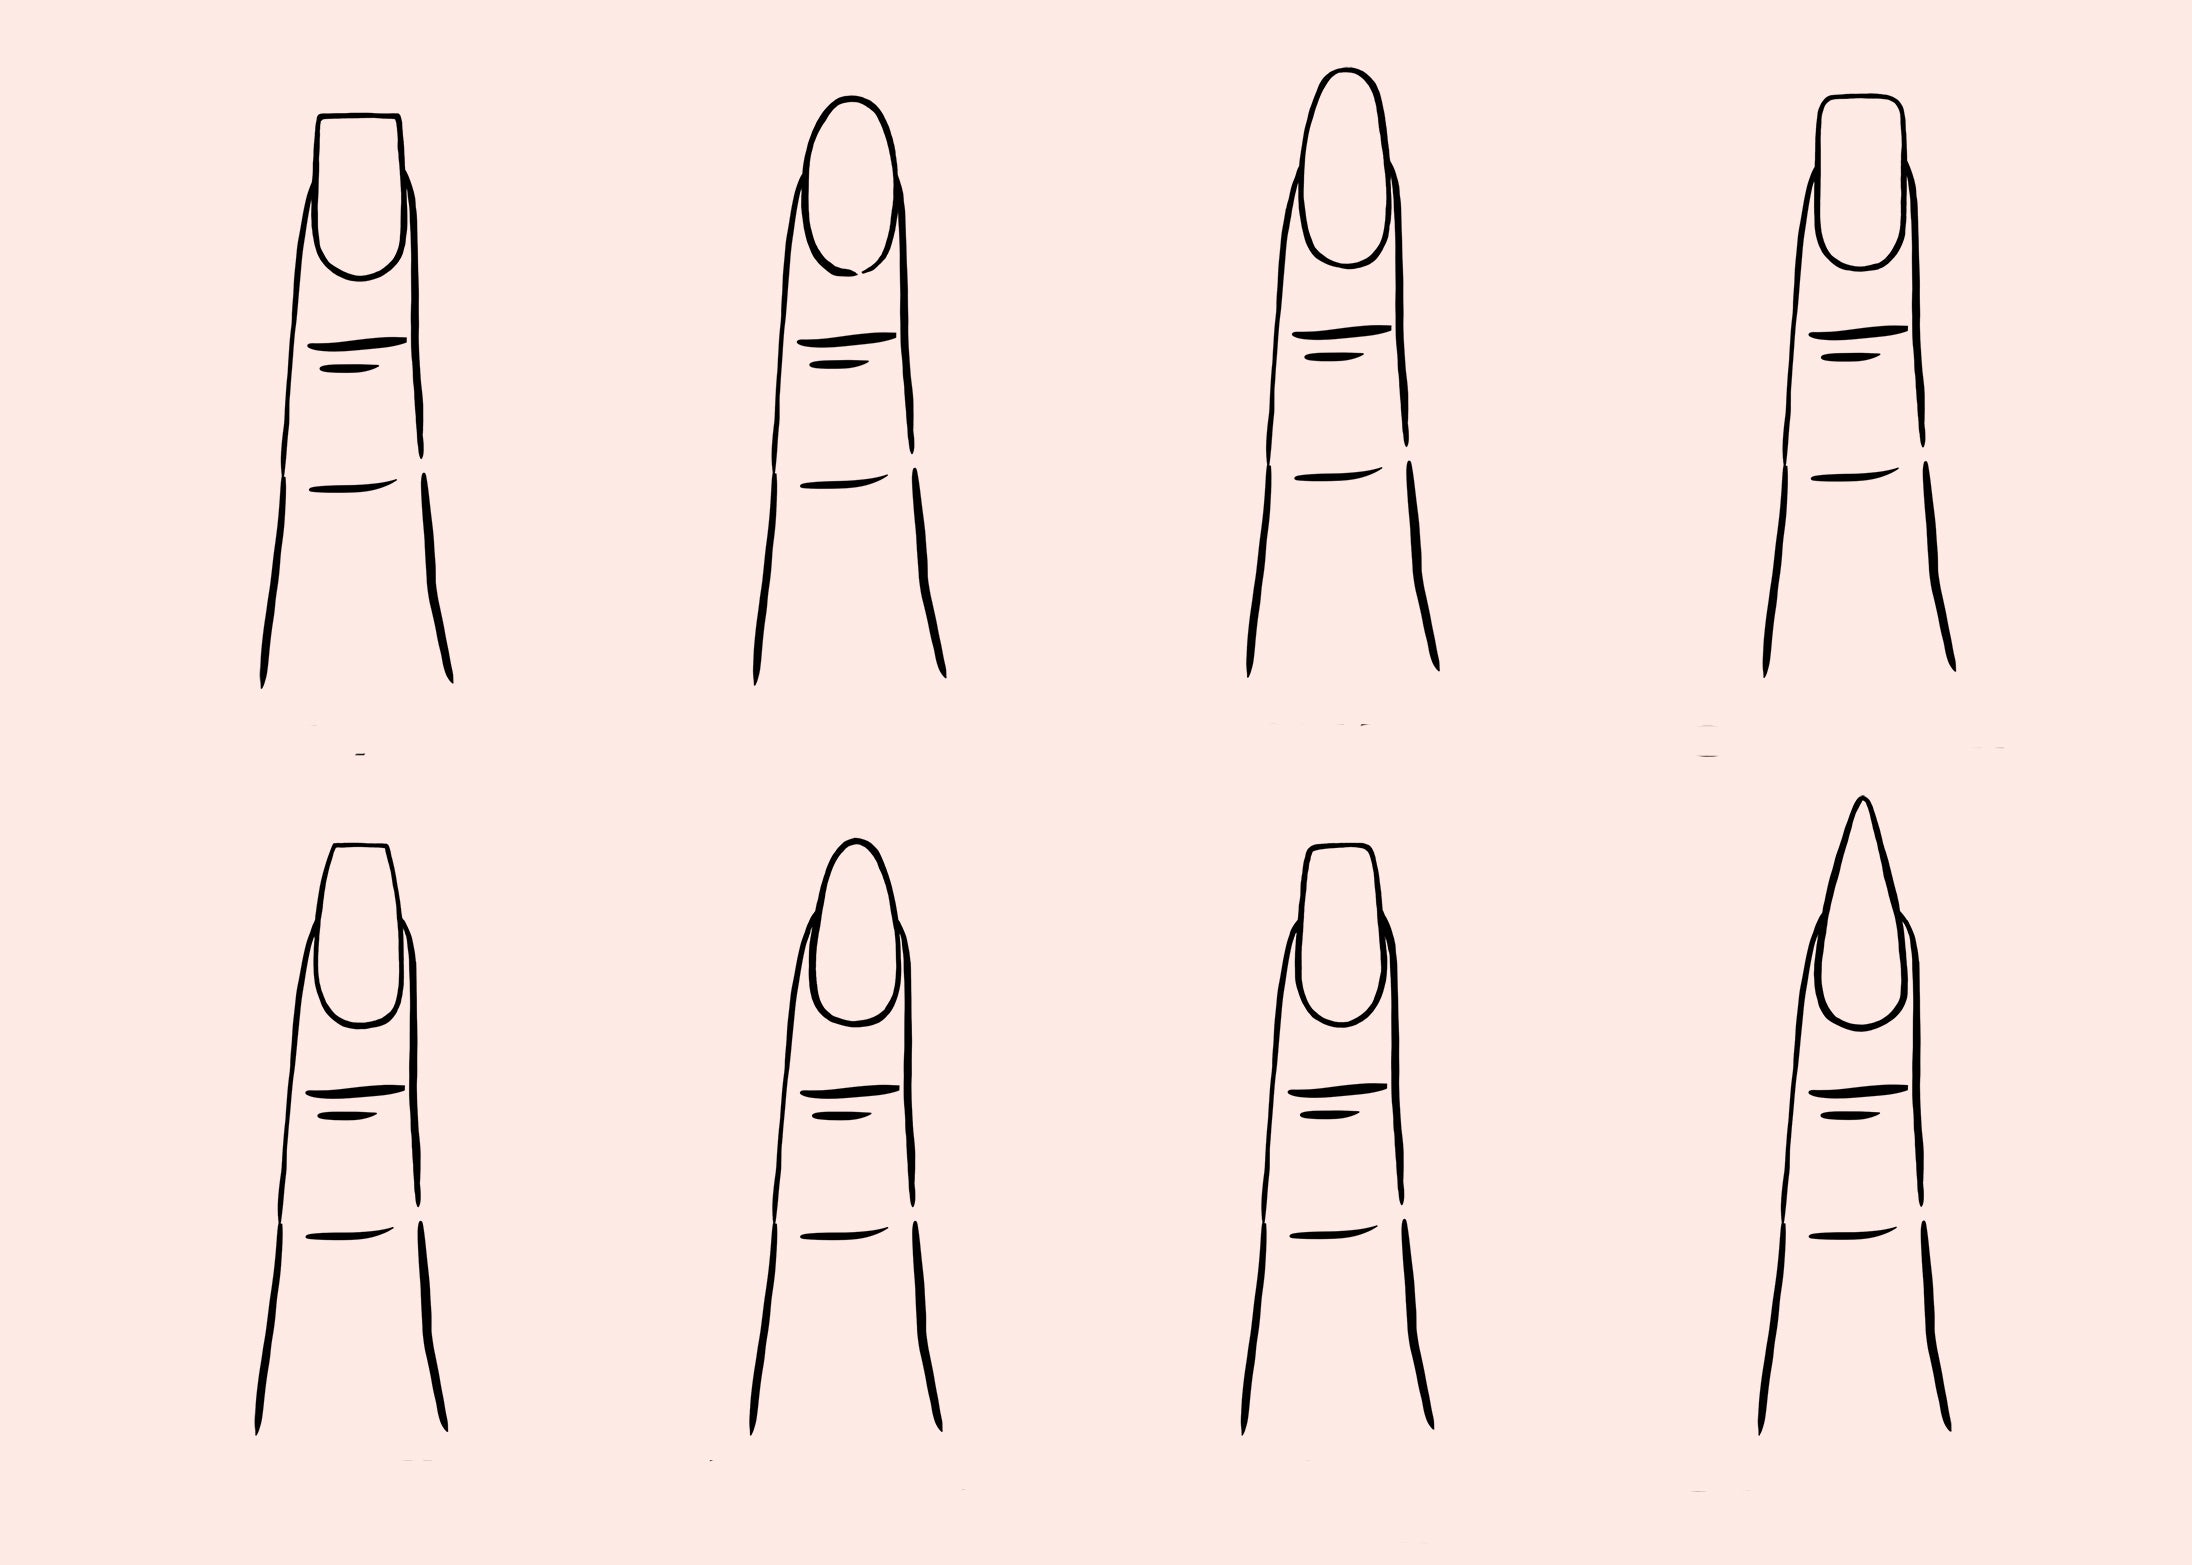 Genetic Nail Shape Guide and Advice — Winchester Bloggers